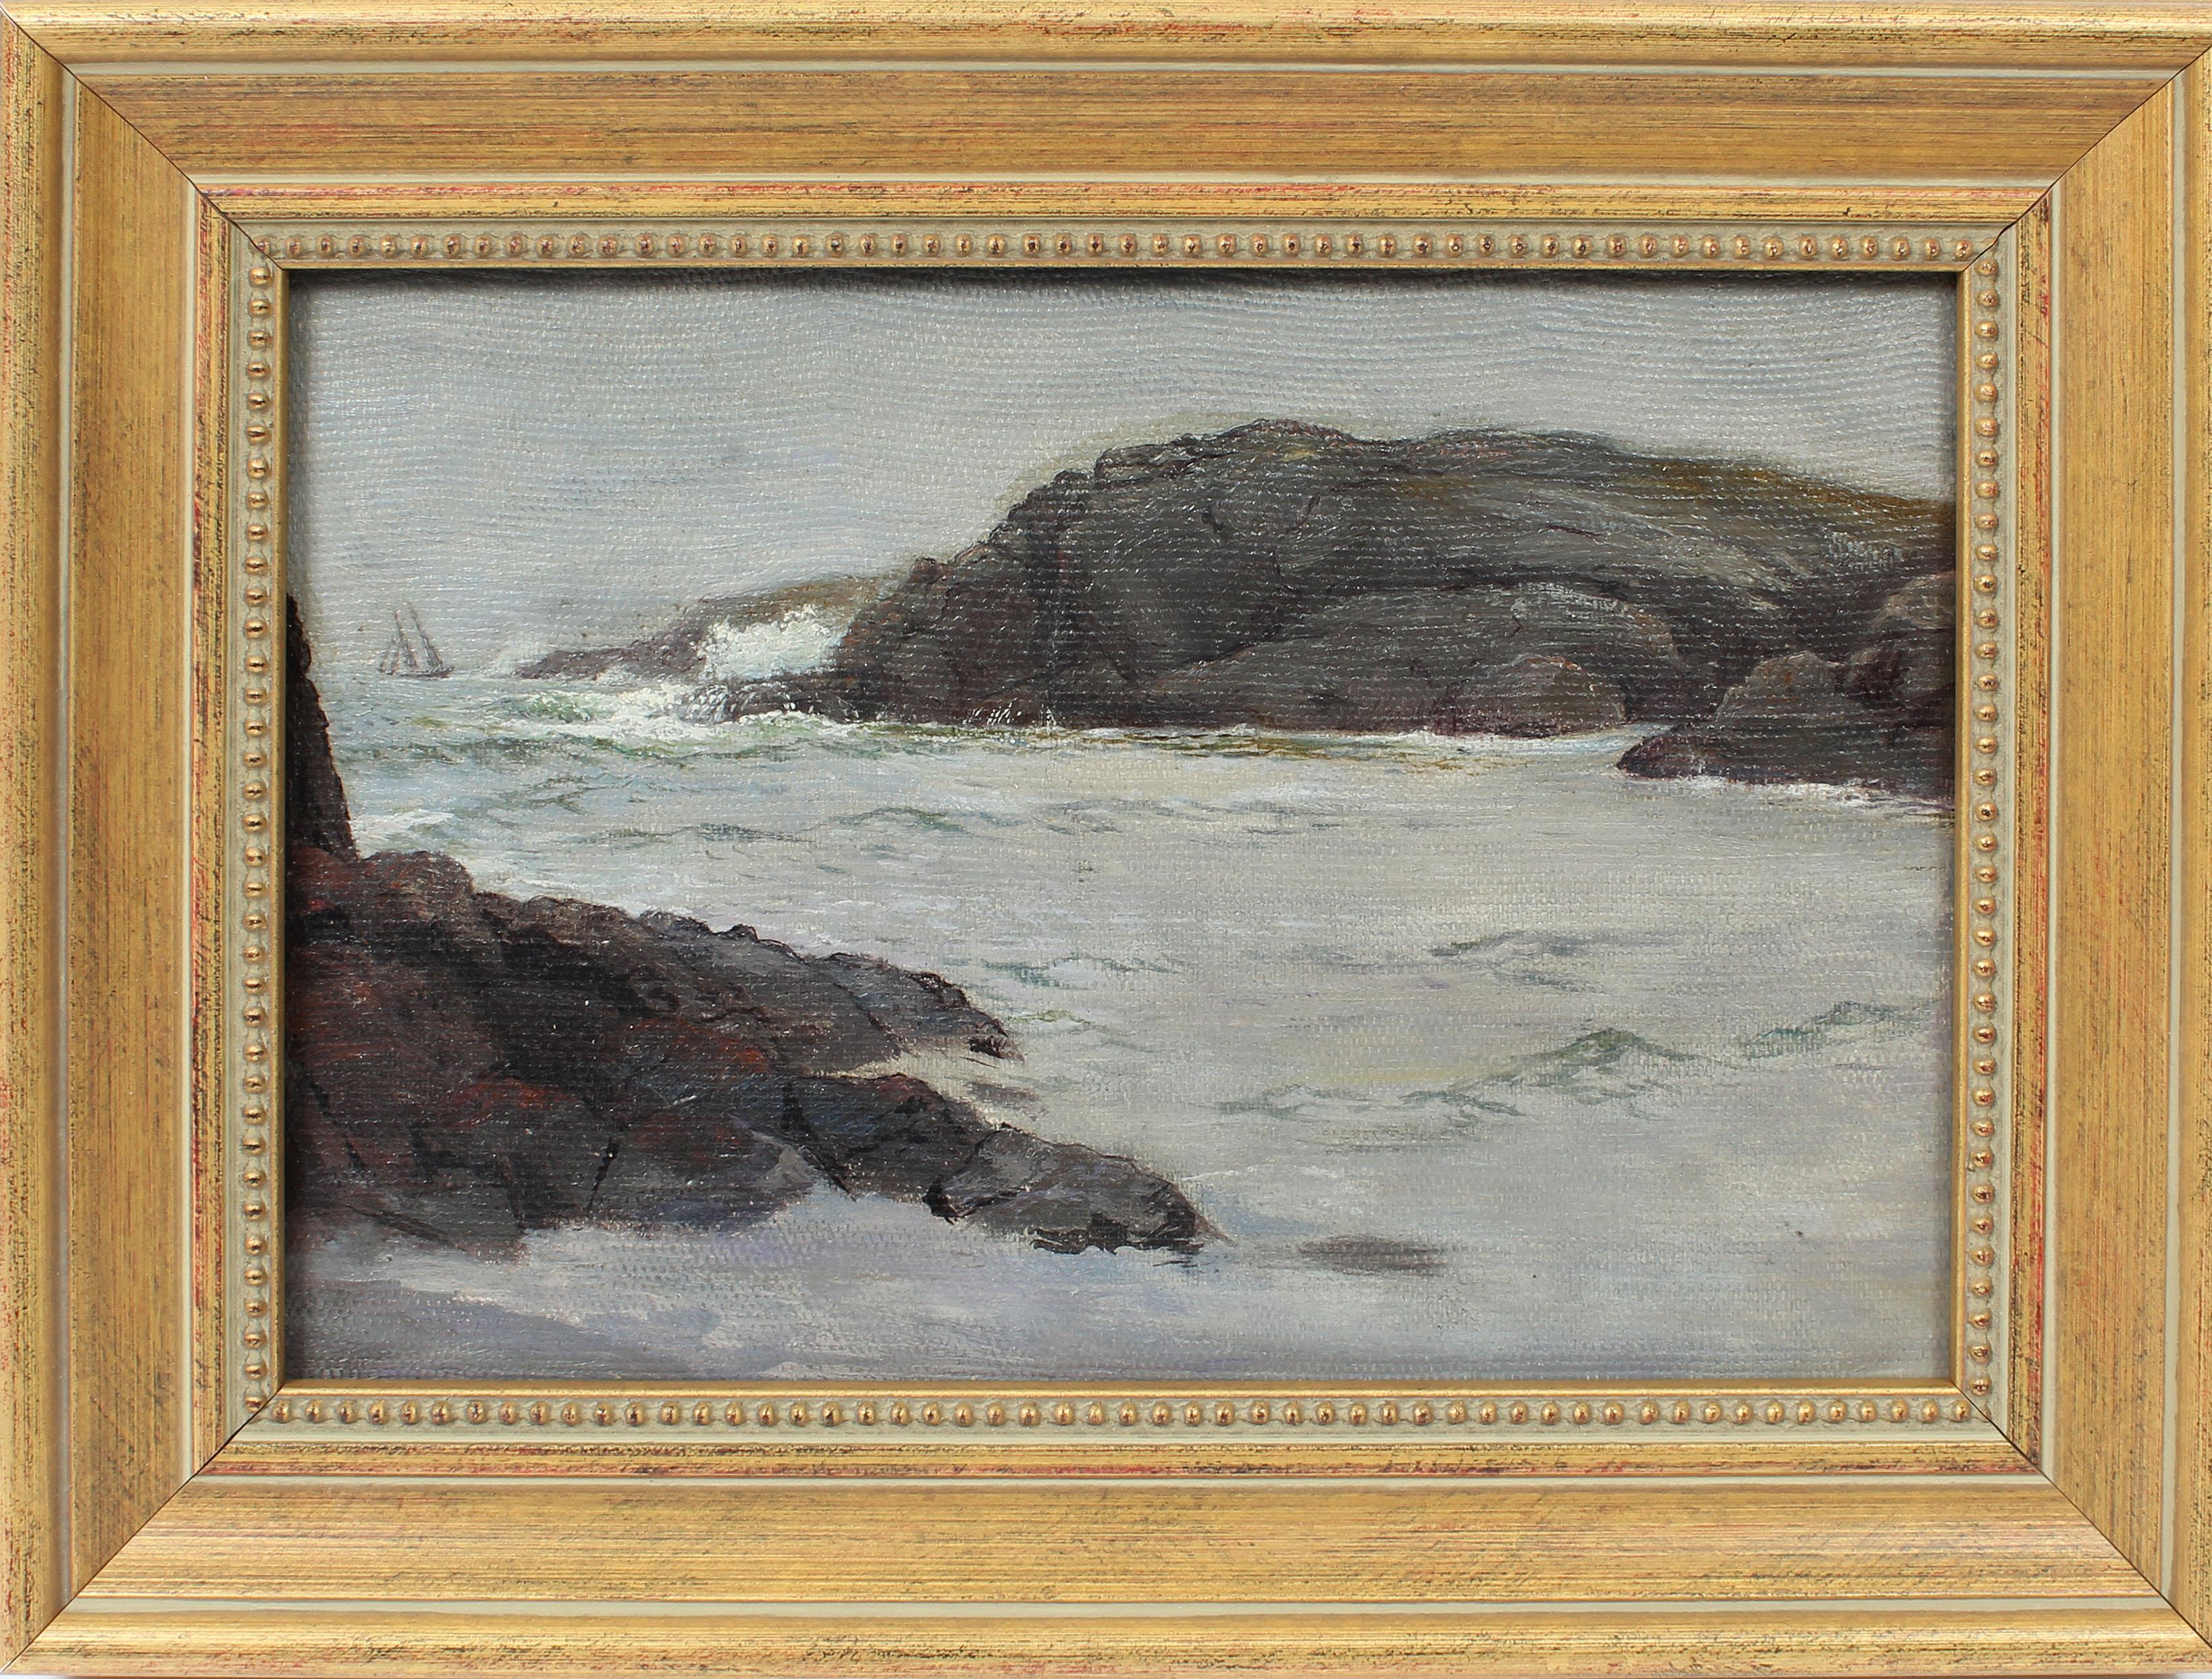 Unknown Landscape Painting - Antique American School Impressionist Seascape Ocean Wave Study Oil Painting